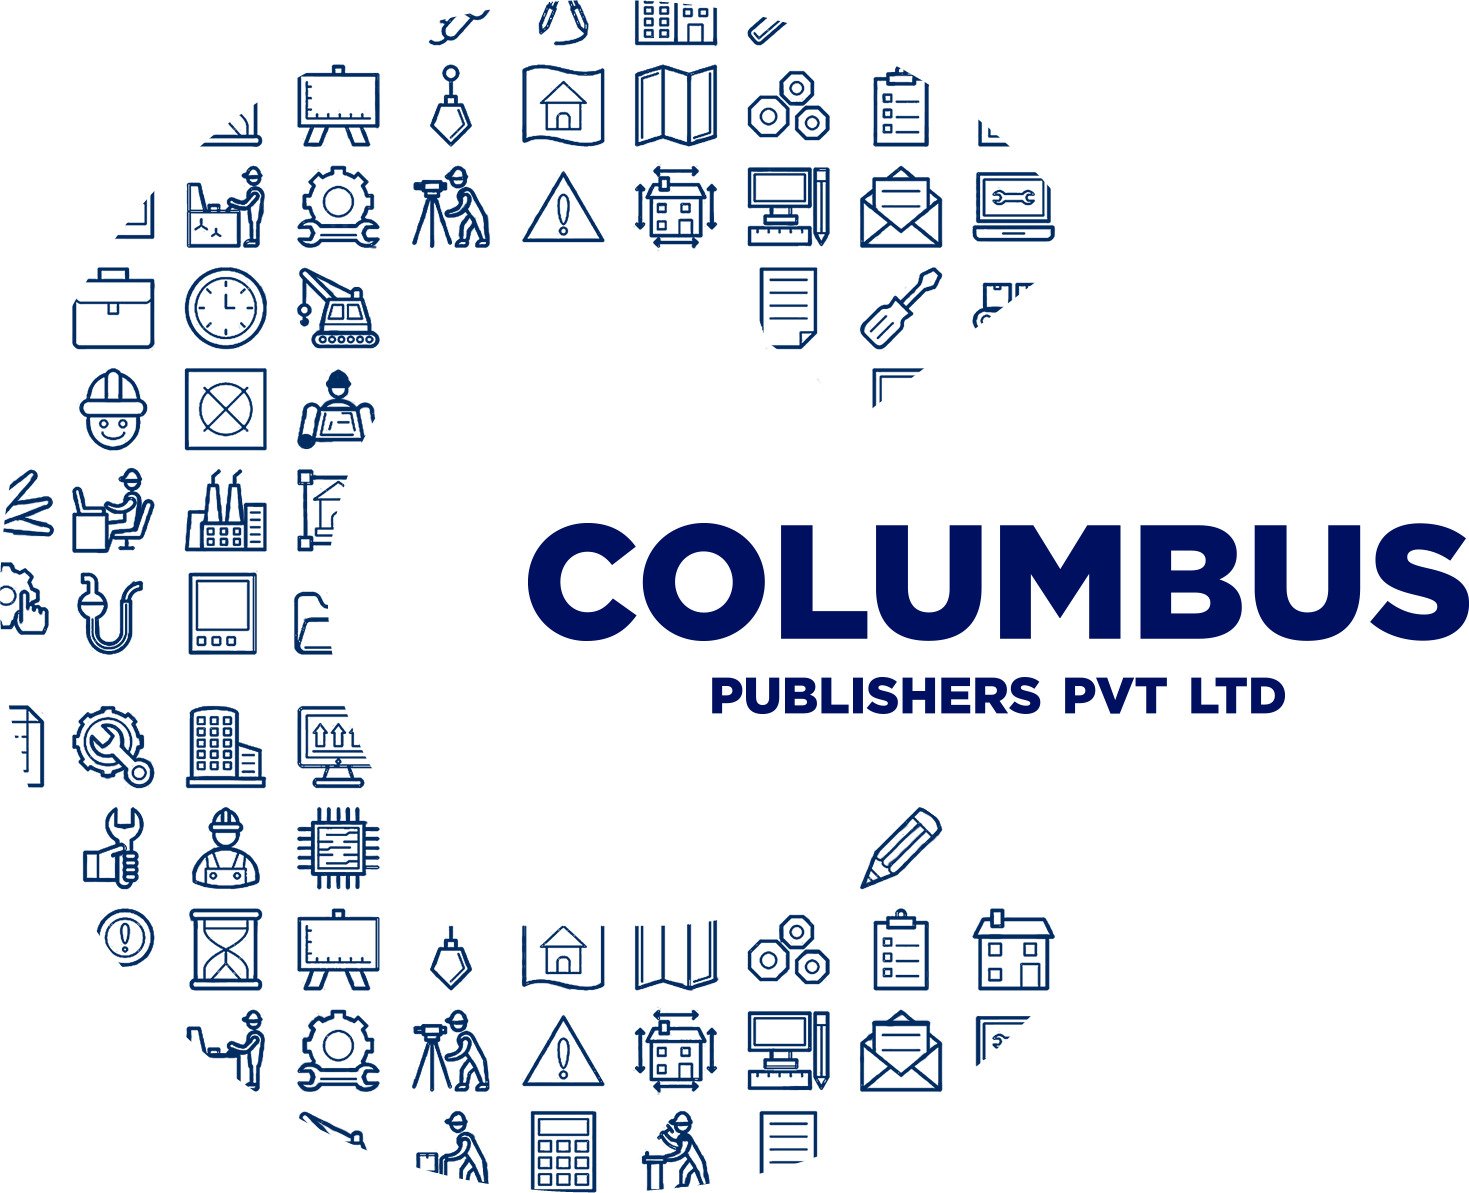 Columbus Publications is here to serve the research community by publishing its most significant discoveries in Many fields.